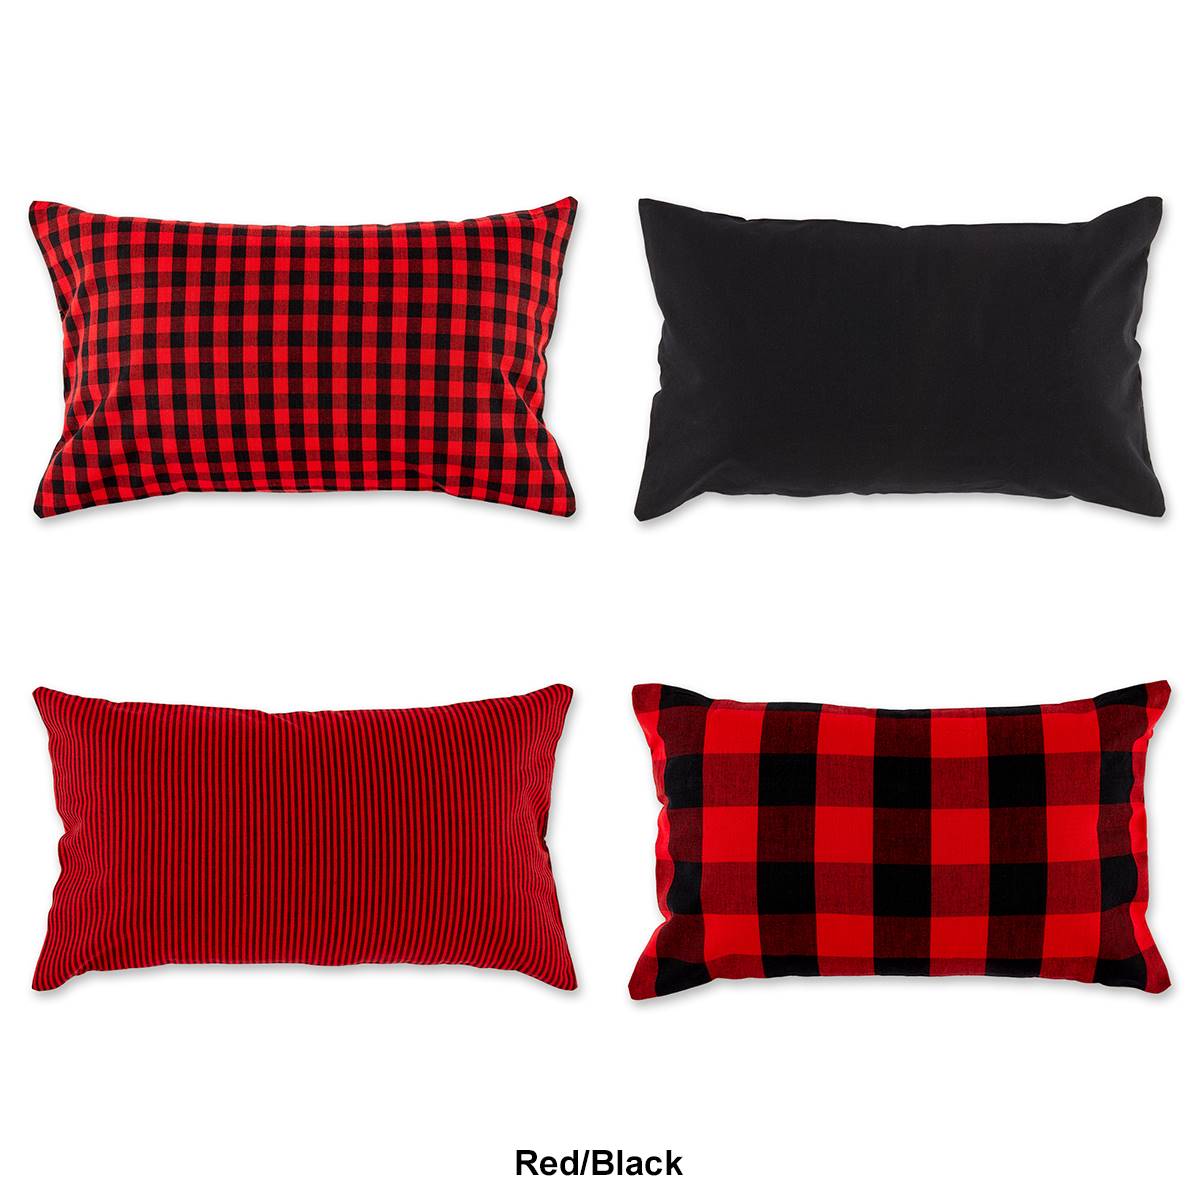 DII(R) Assorted Pillow Covers Set Of 4 - 12x20